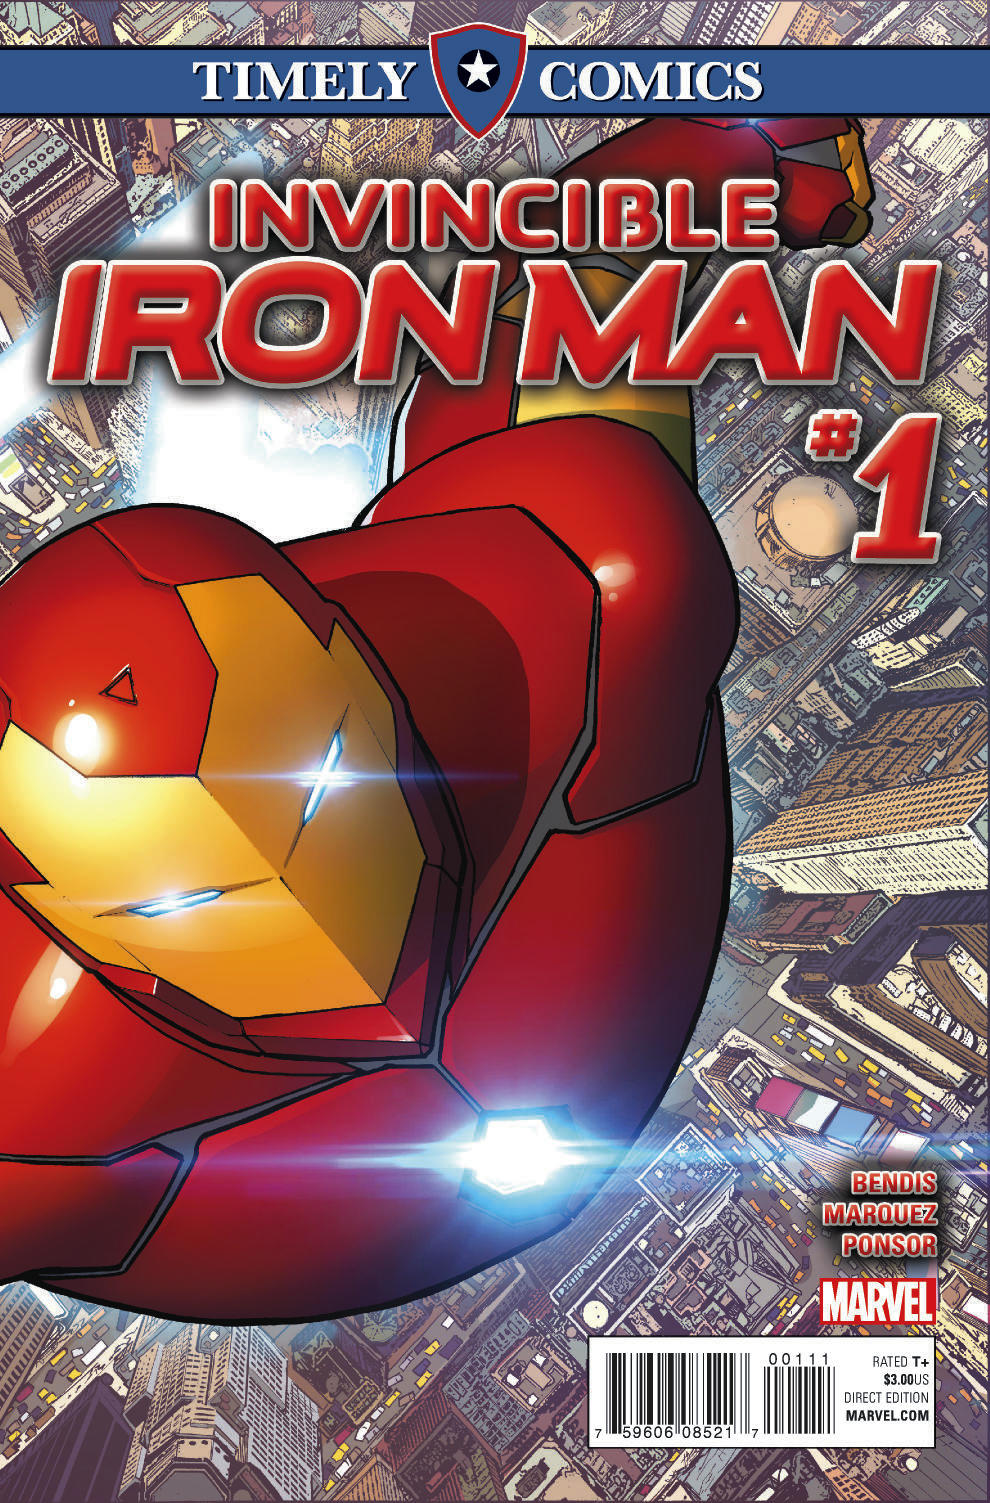 Timely Comics: Invincible Iron Man (2016) #1